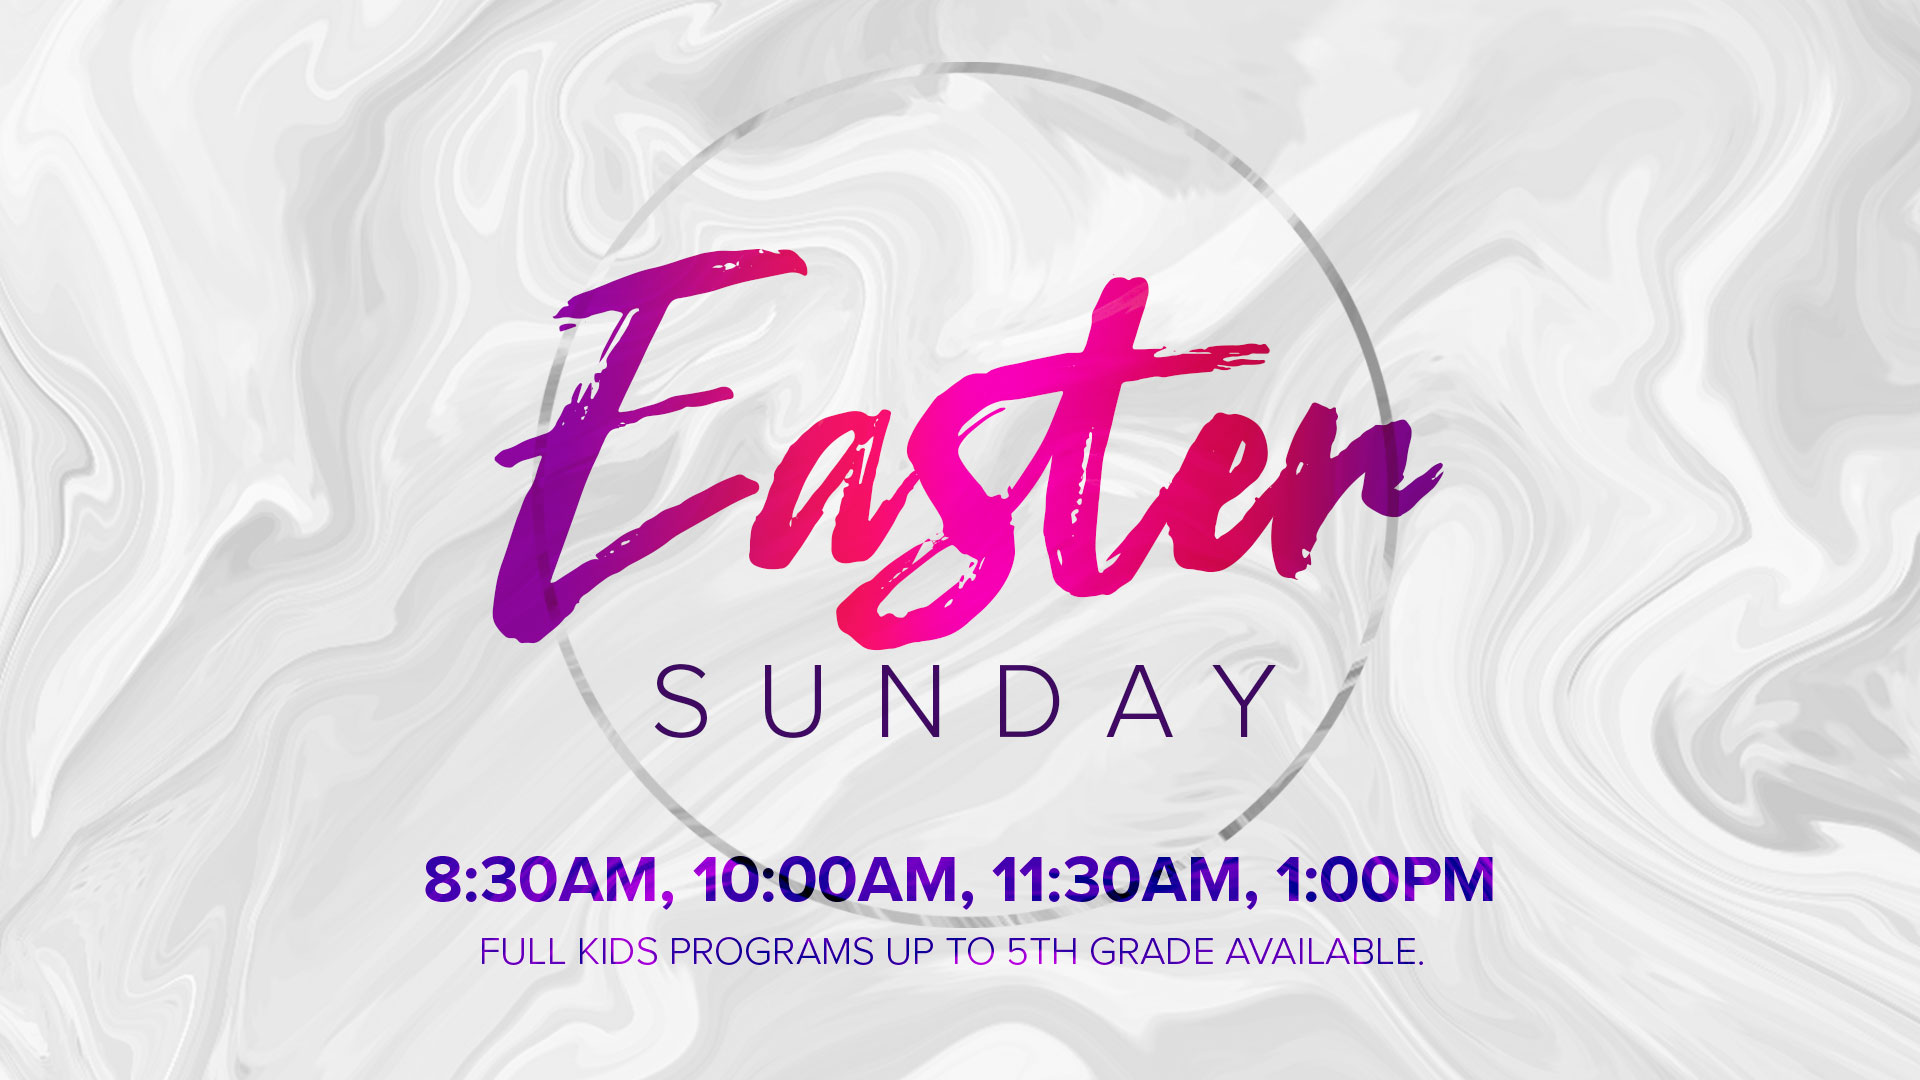 Experience Easter Transformation Church